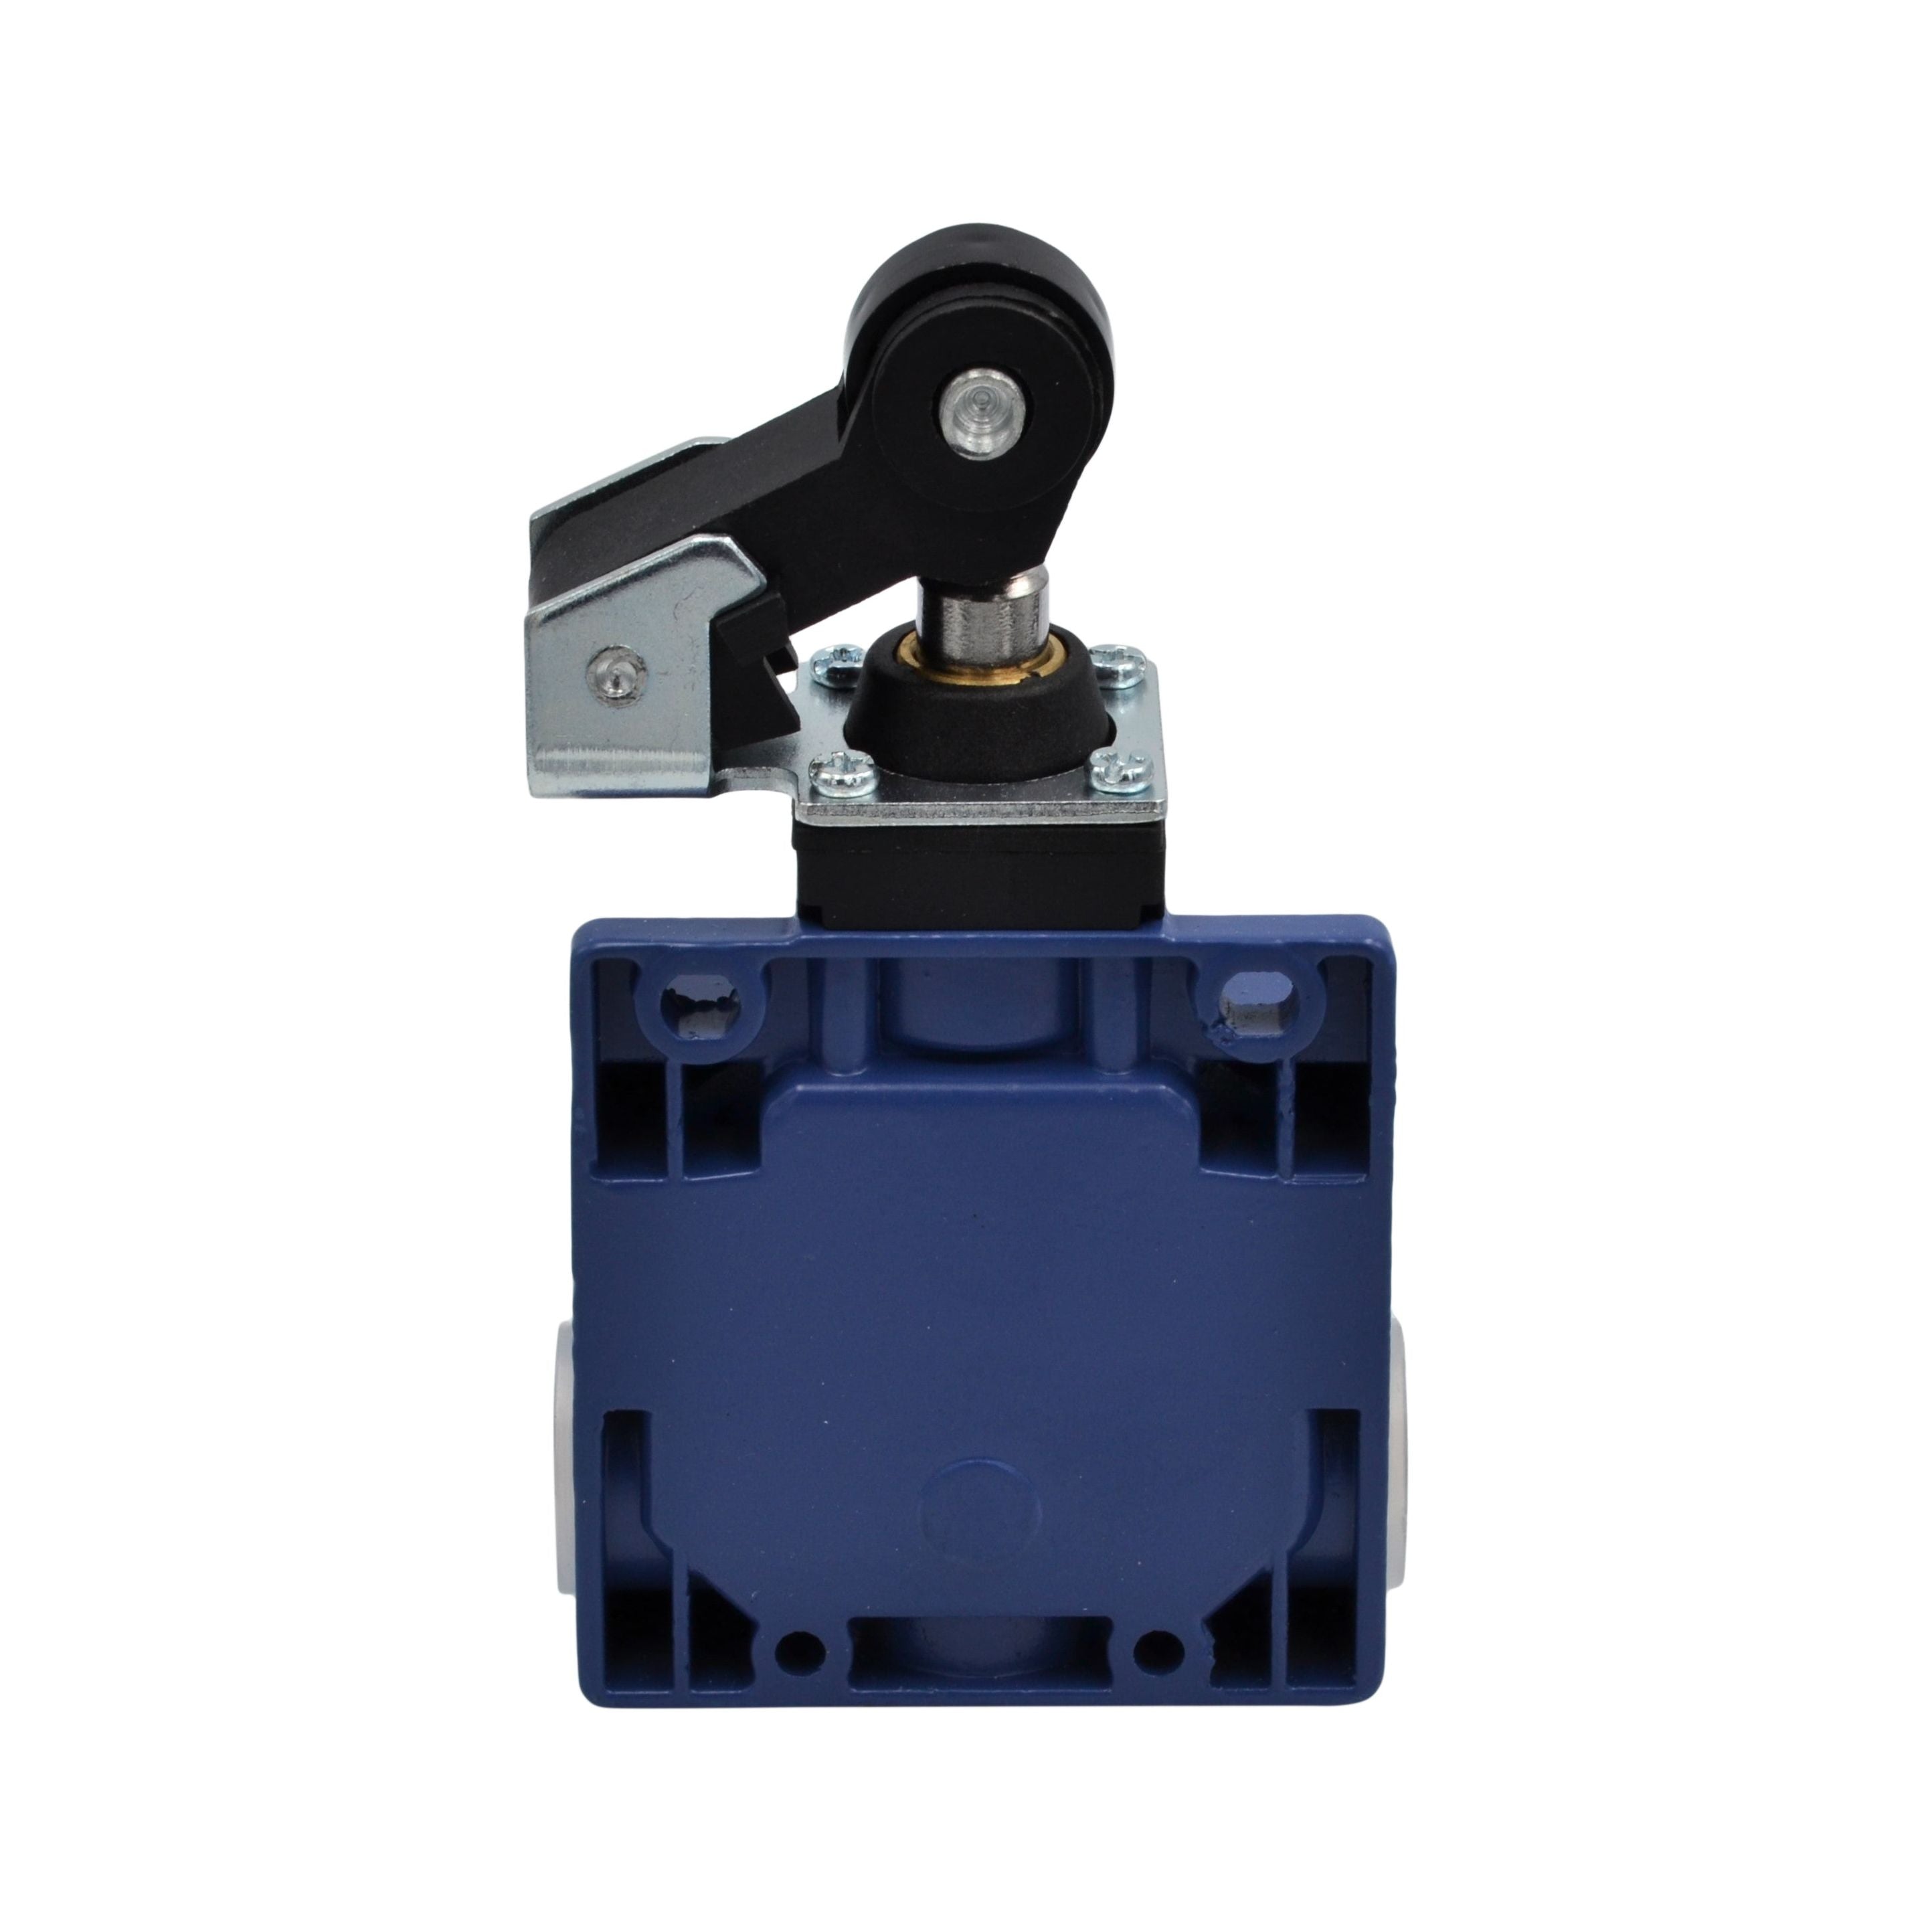 XCK-M121 Thermoplastic Roller Lever Plunger Limit Switch